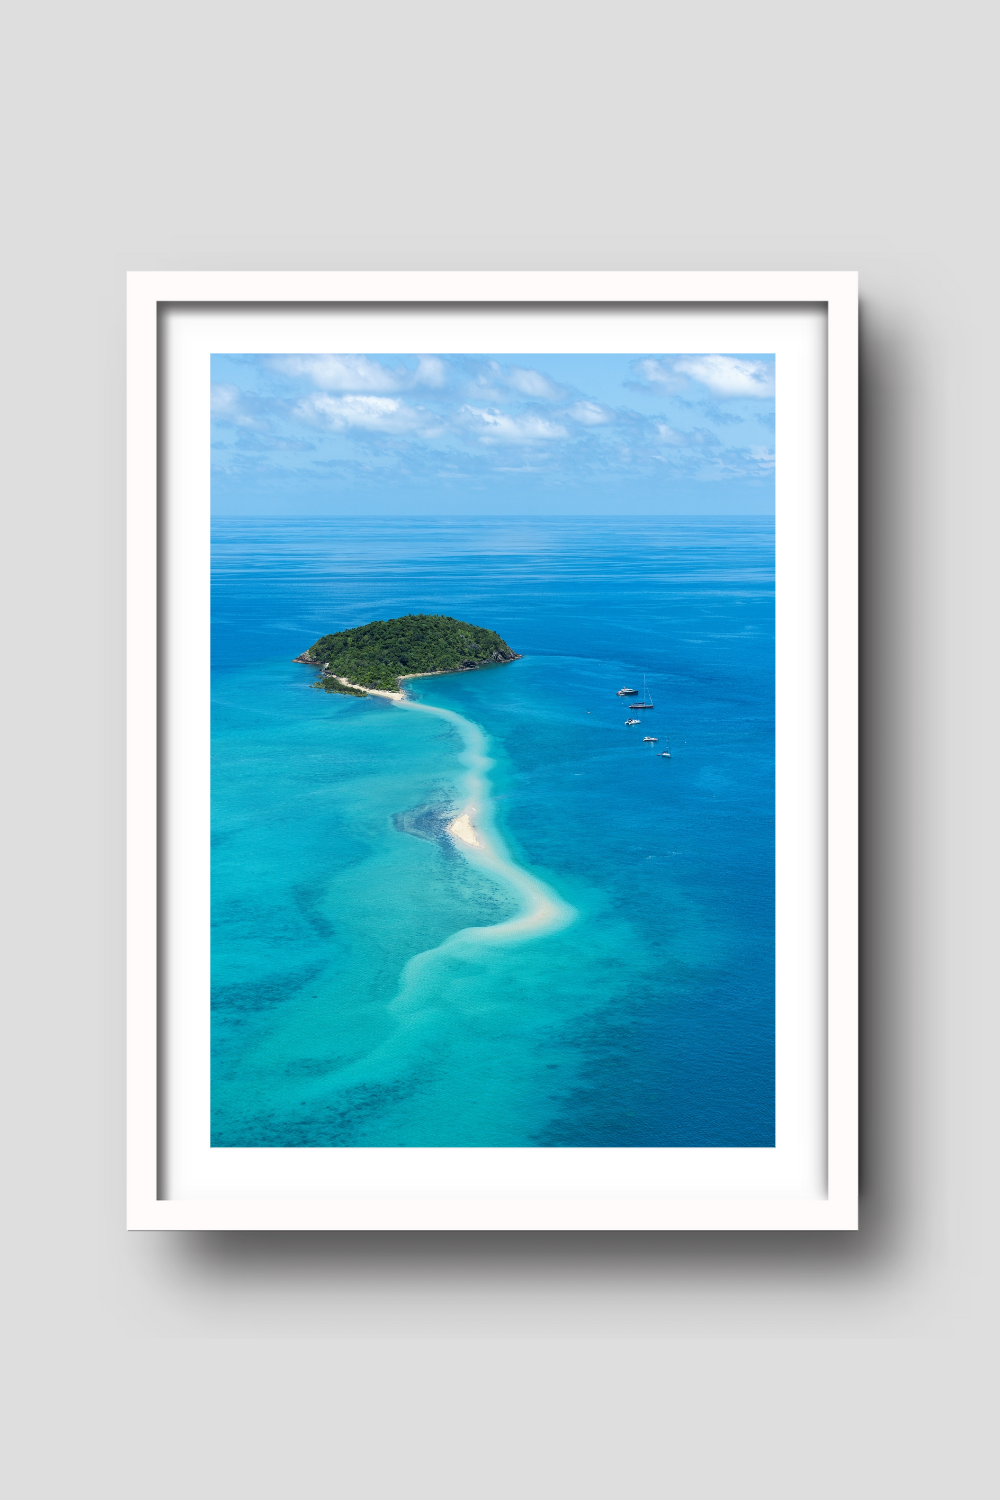 small island with sailing vessels anchored nearby a snaking sandbar through the turquiose waters